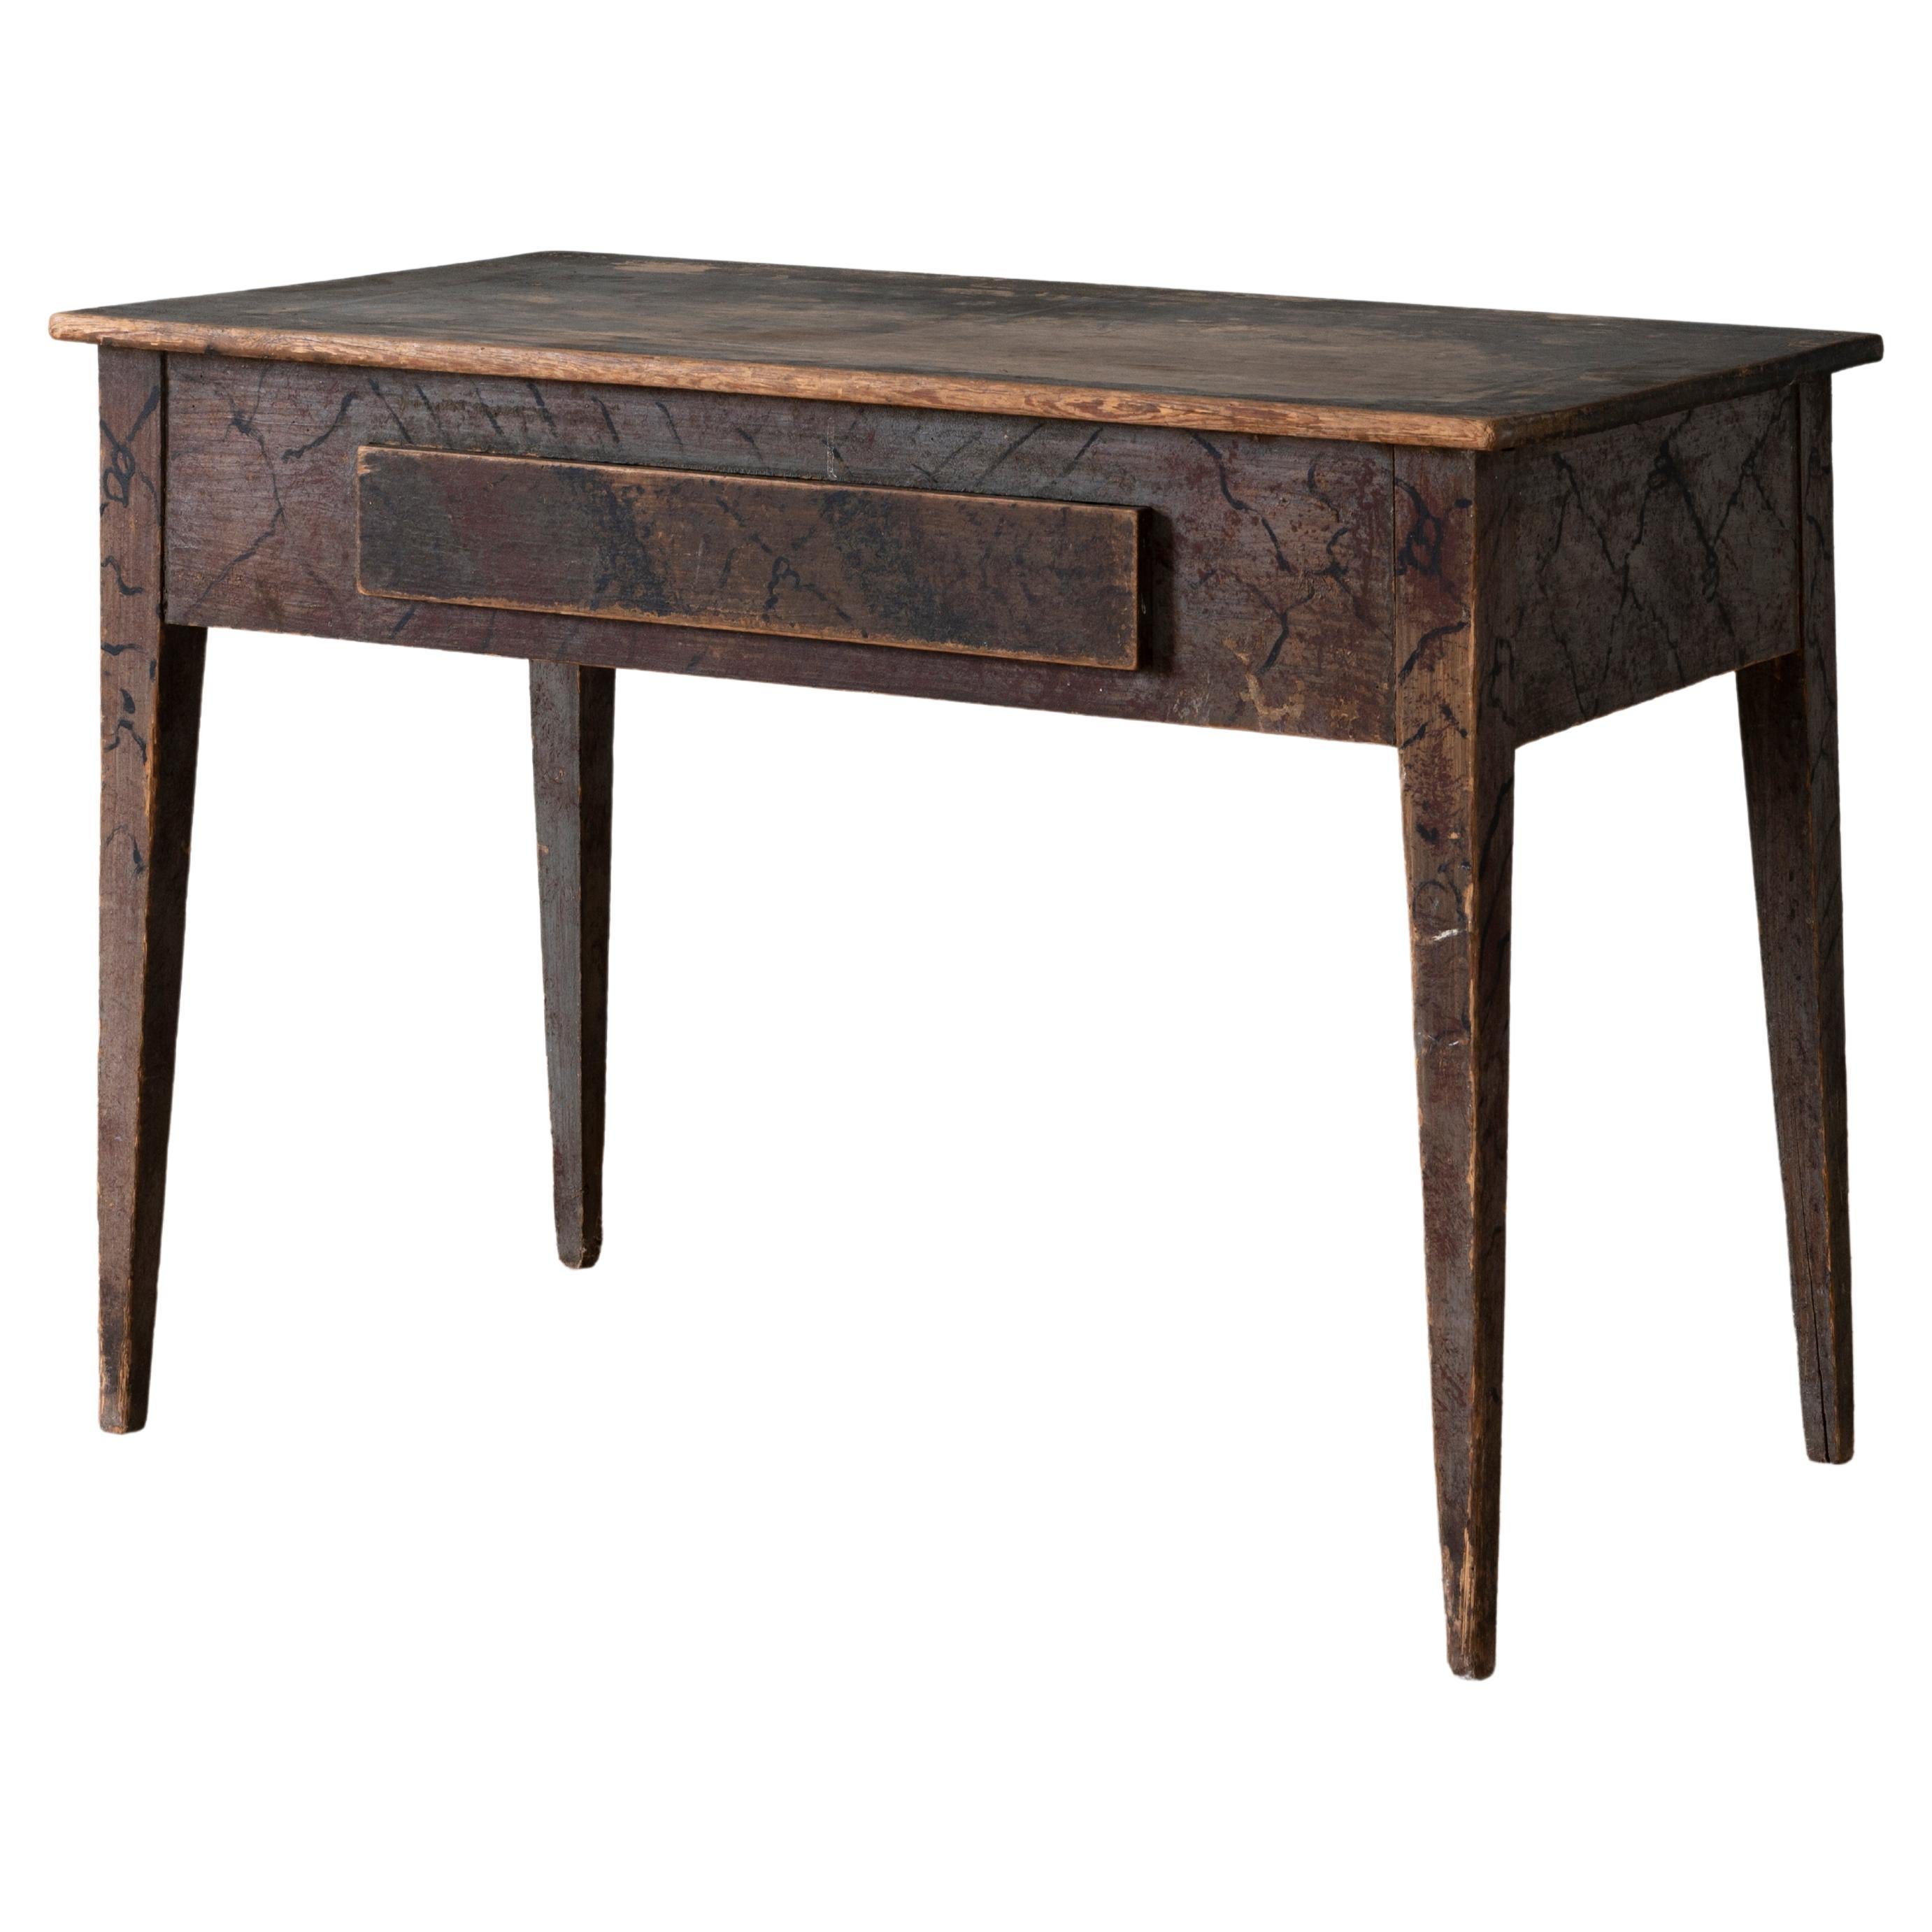 Good 19th century Provincial Gustavian Table